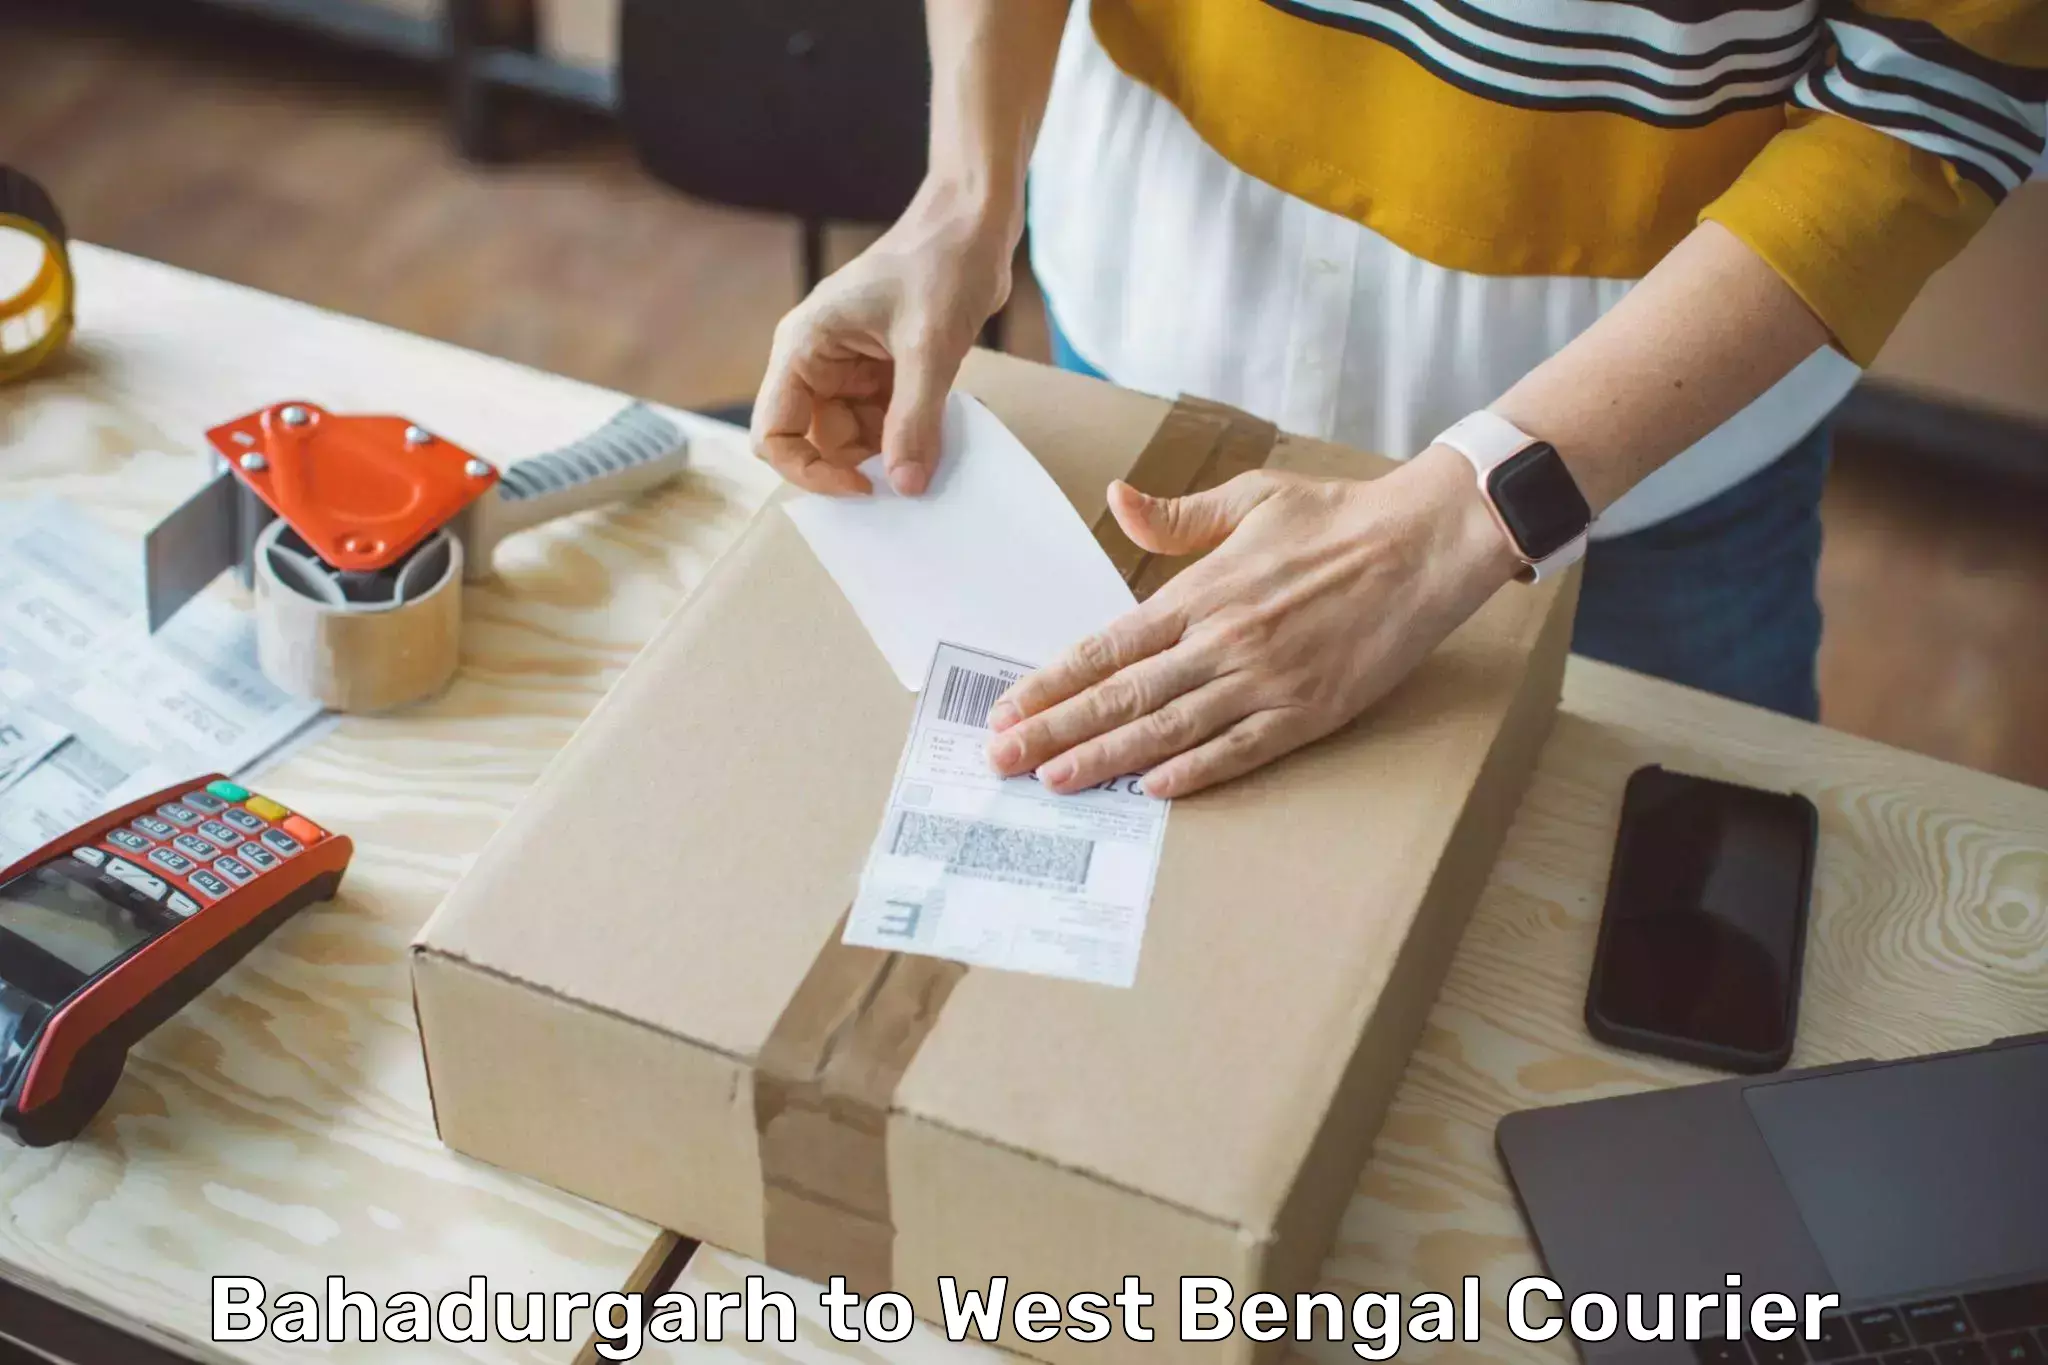 Reliable delivery network Bahadurgarh to West Bengal